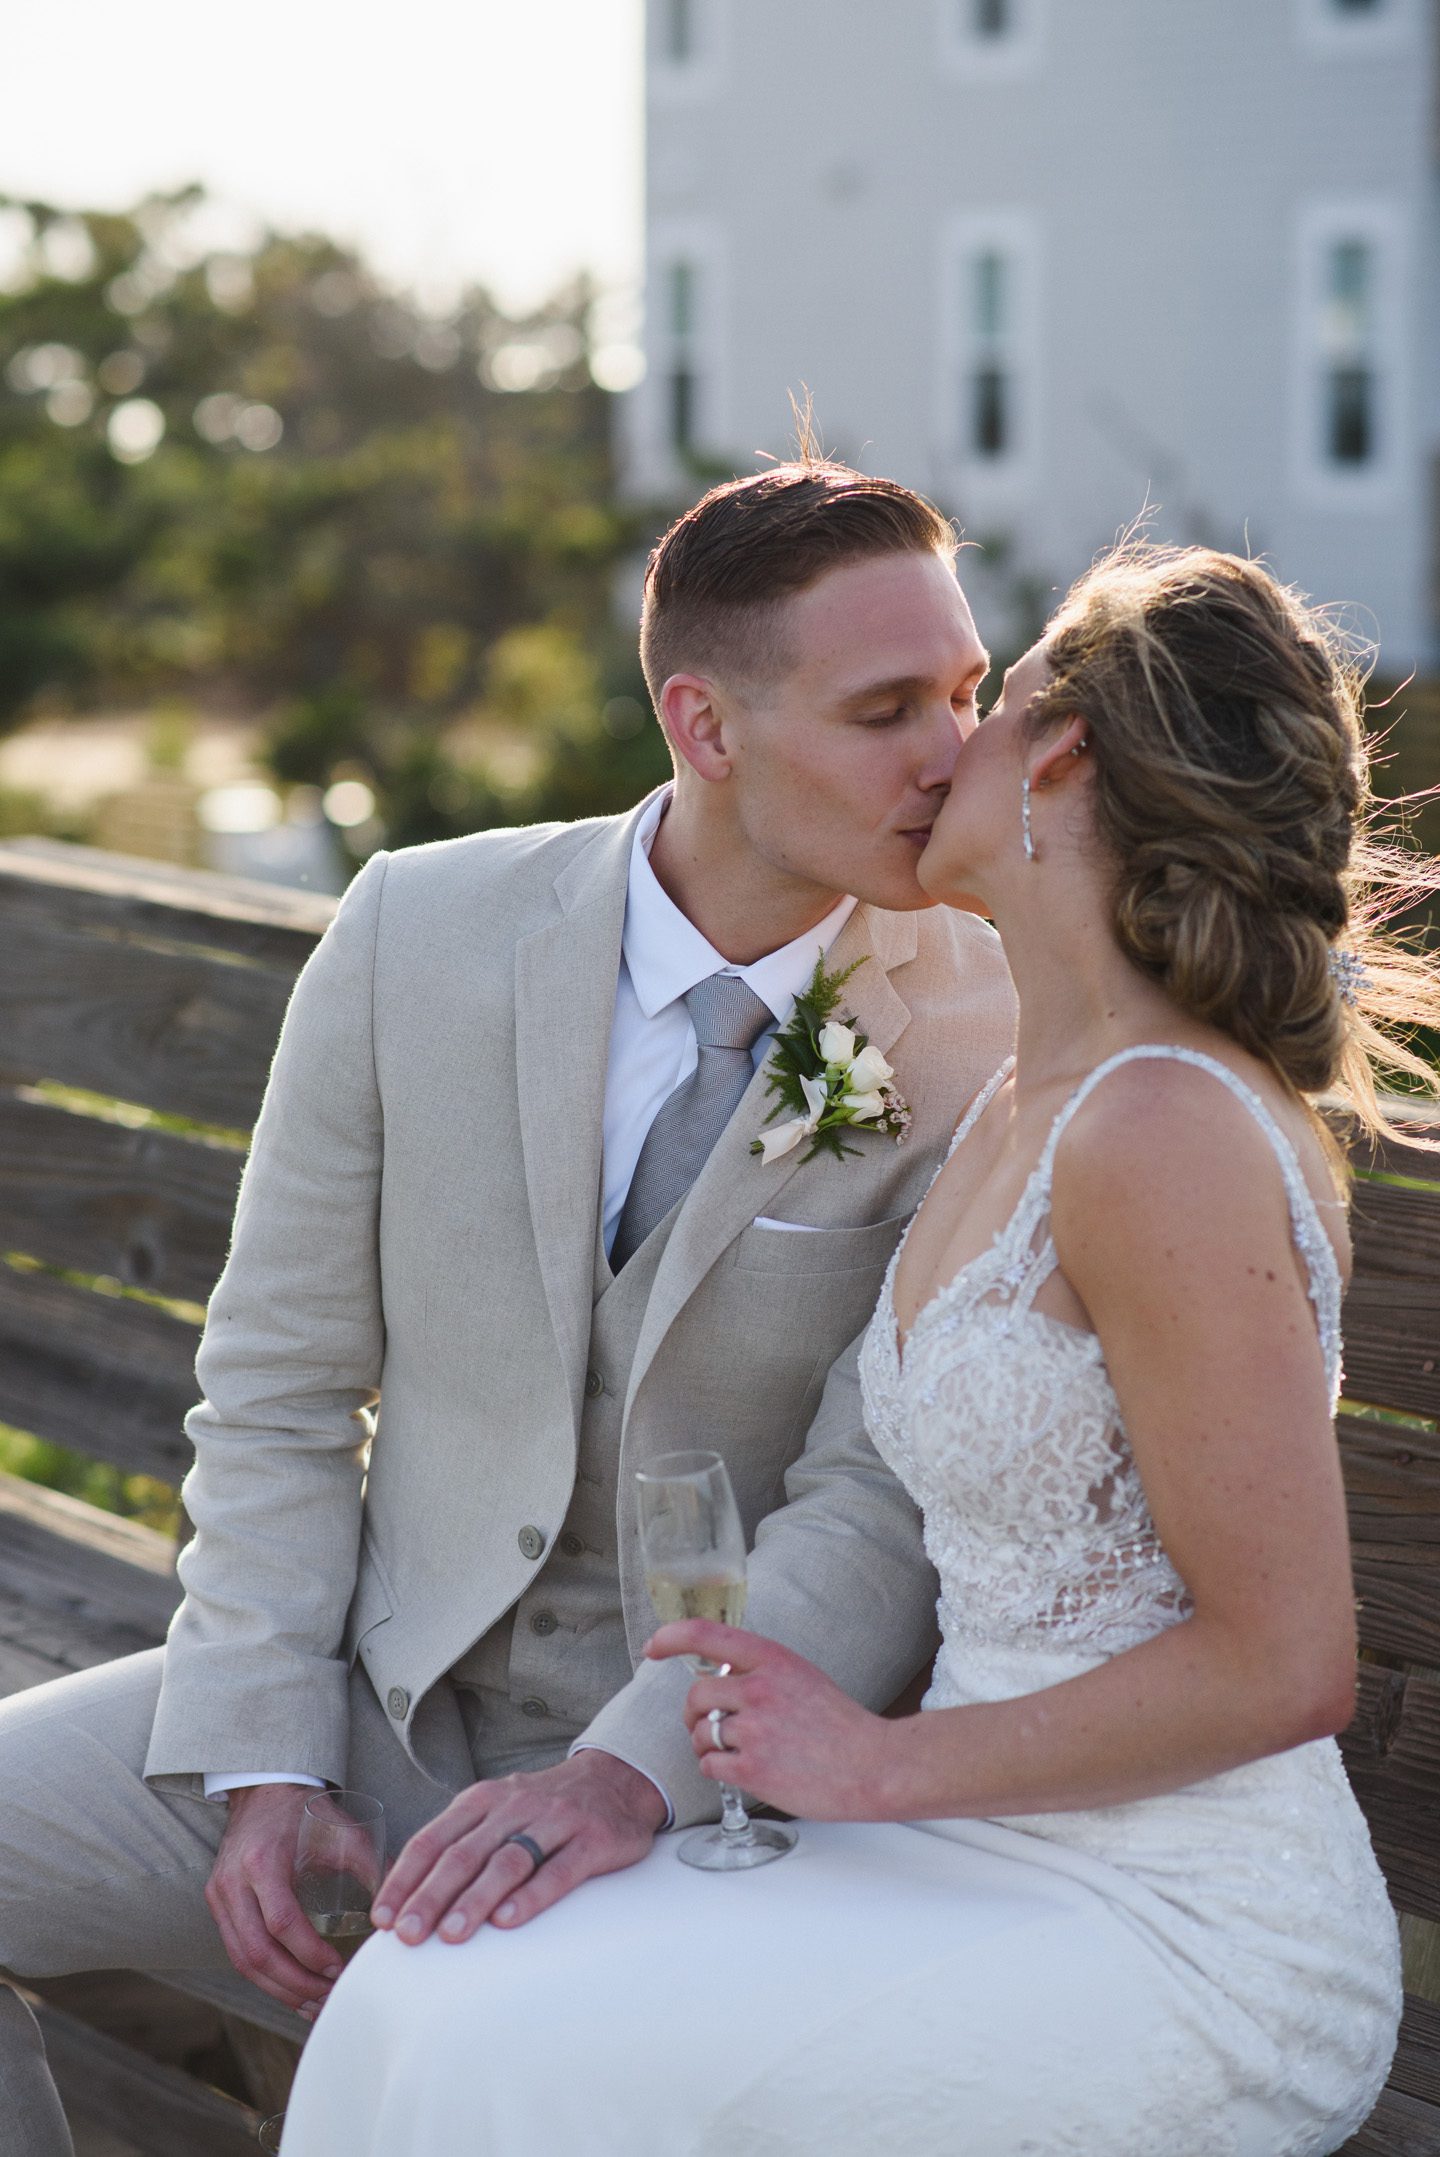 Outer Banks Wedding Photographers Neil GT Photography Palmers Island Beach Elopement Champagne Toast Kiss